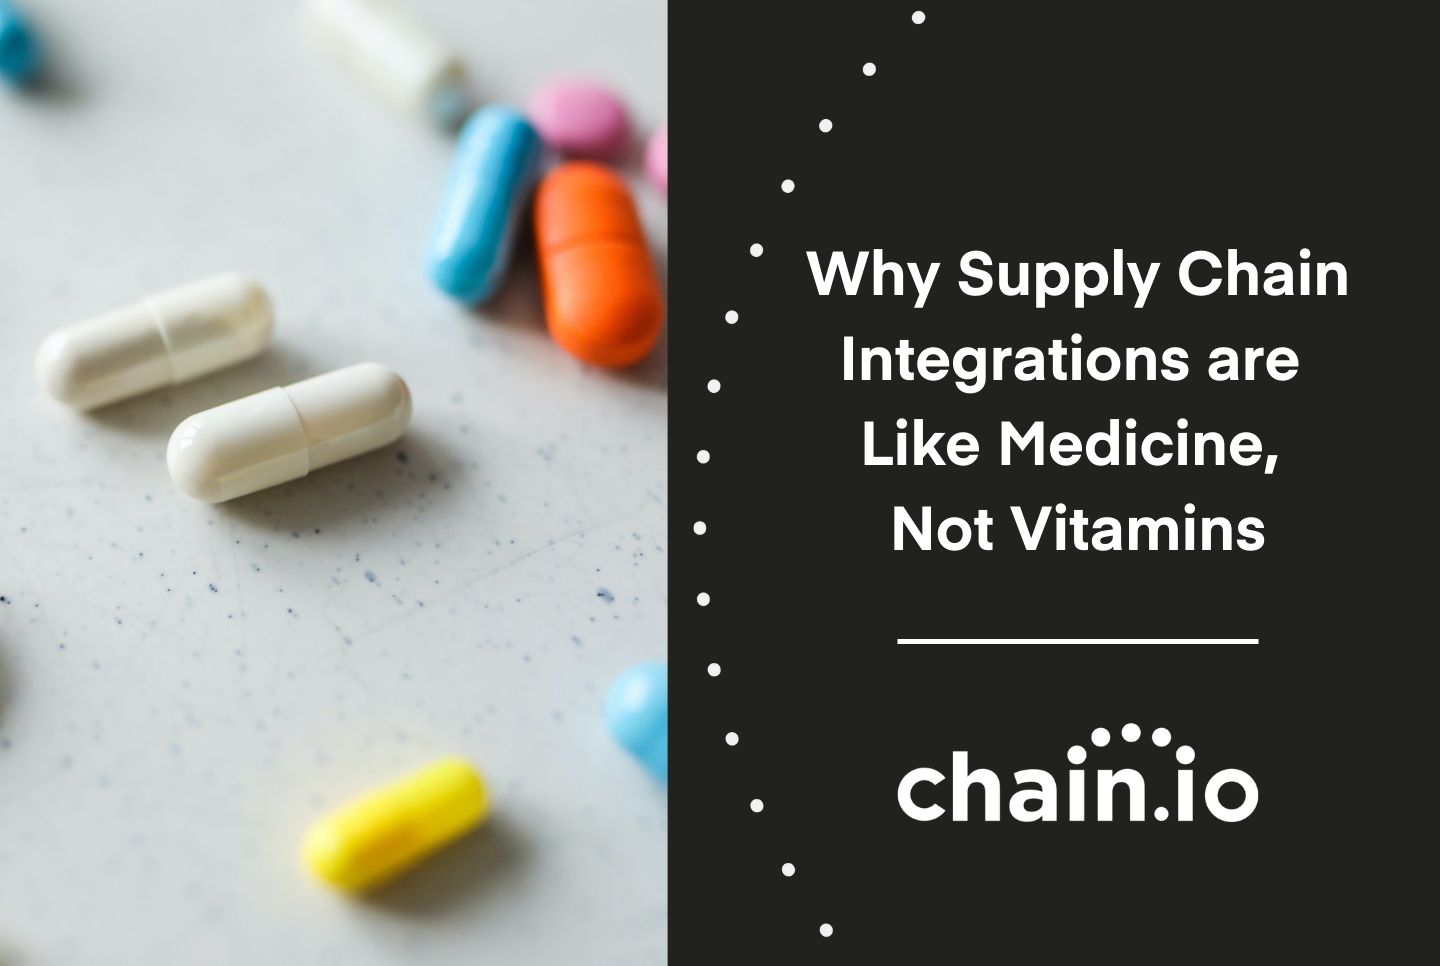 Image of medicine and vitamins with white text on black background reading "why supply chain integrations are like medicine, not vitamins."